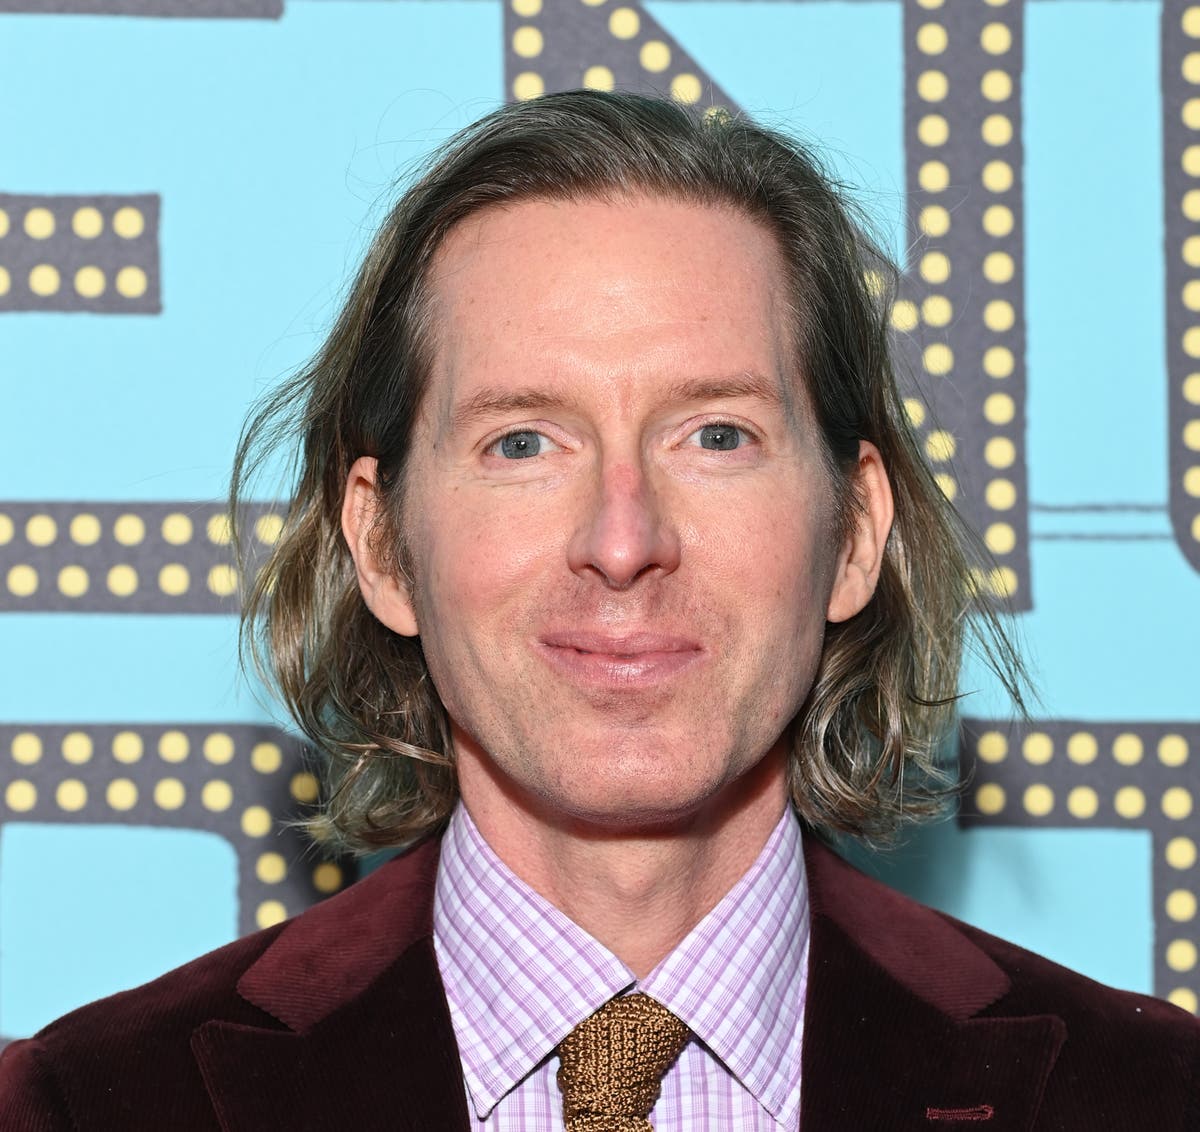 Fans impressed by new Wes Anderson film’s all-star cast including Scarlett Johansson